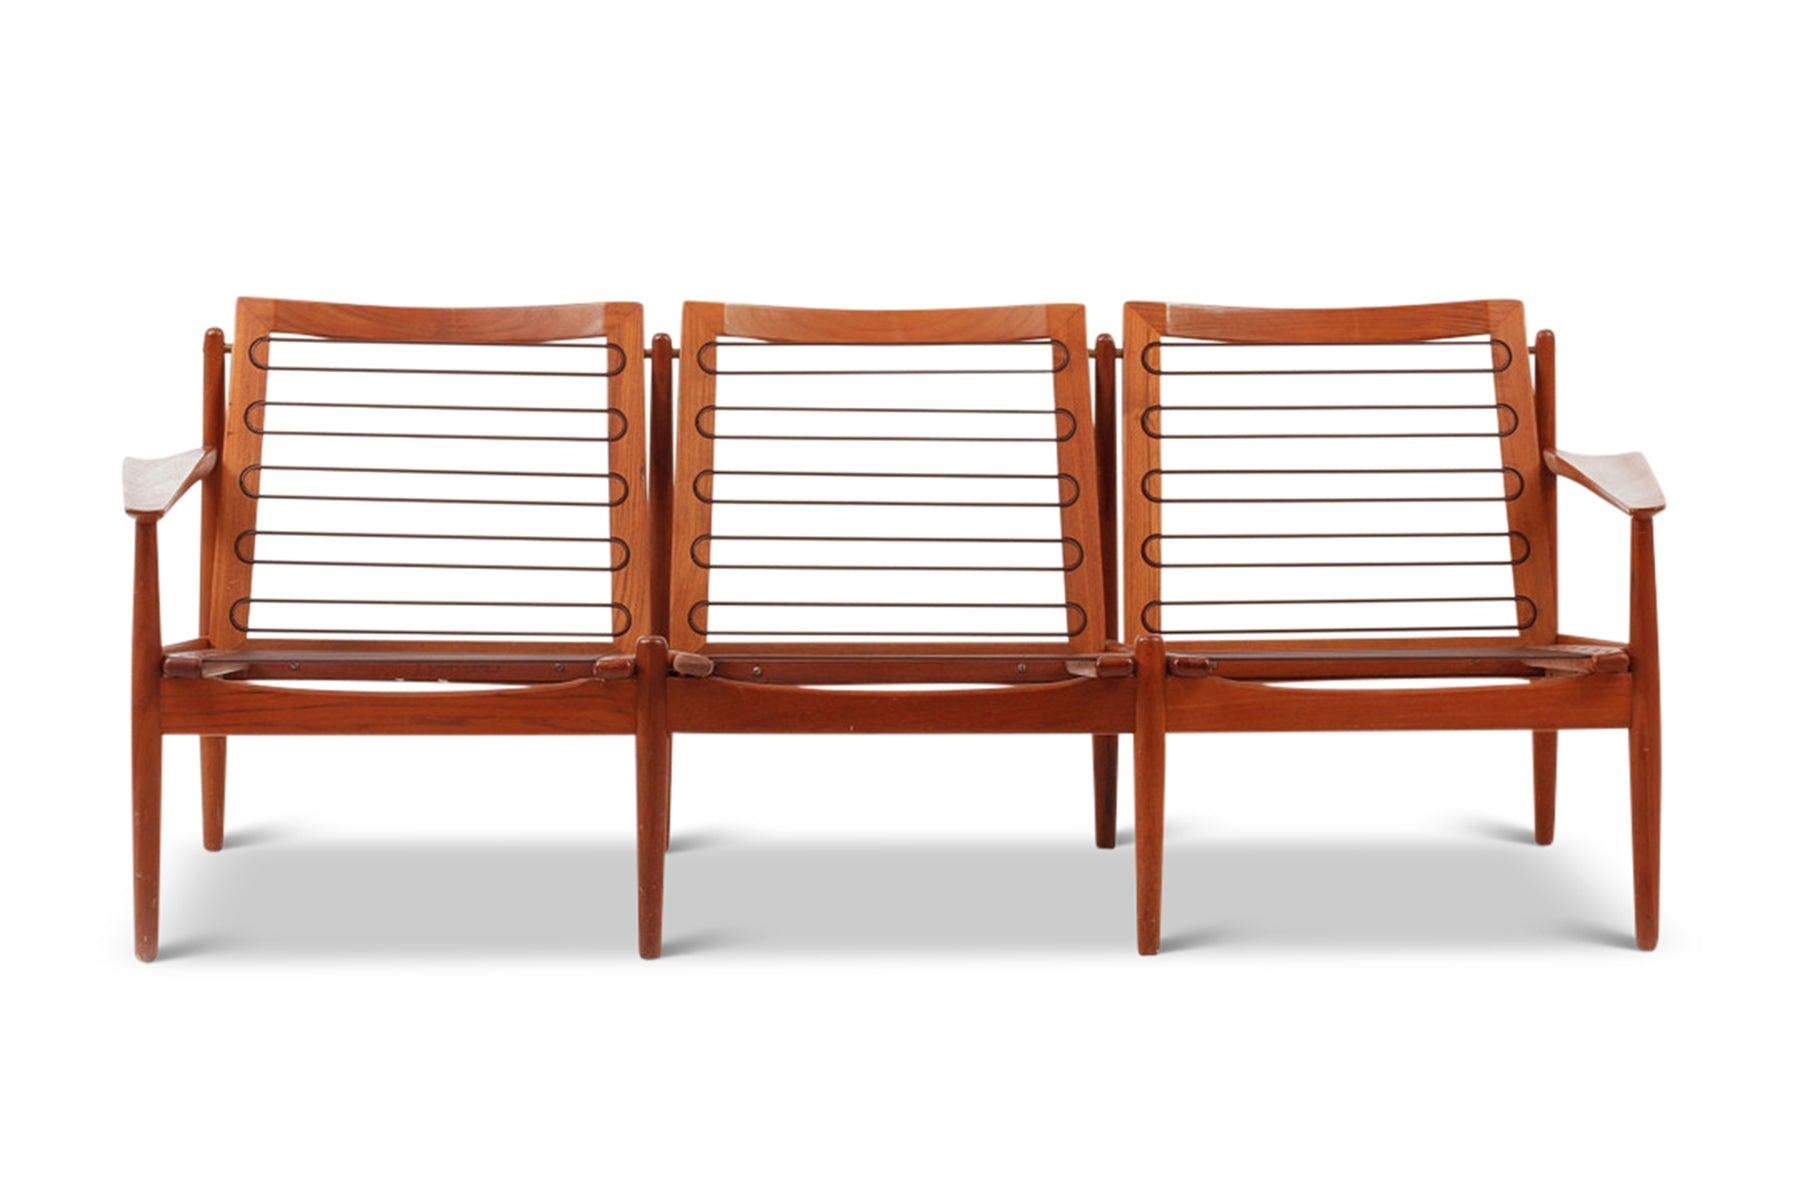 Origin: Denmark
Designer: Arne Vodder
Manufacturer: Glostrup Möbelfabrik
Era: 1960s
Materials: Teak
Measurements: Inquire for dimensions

Condition: In excellent original condition. New cushions in your choice of fabric to be made (included in